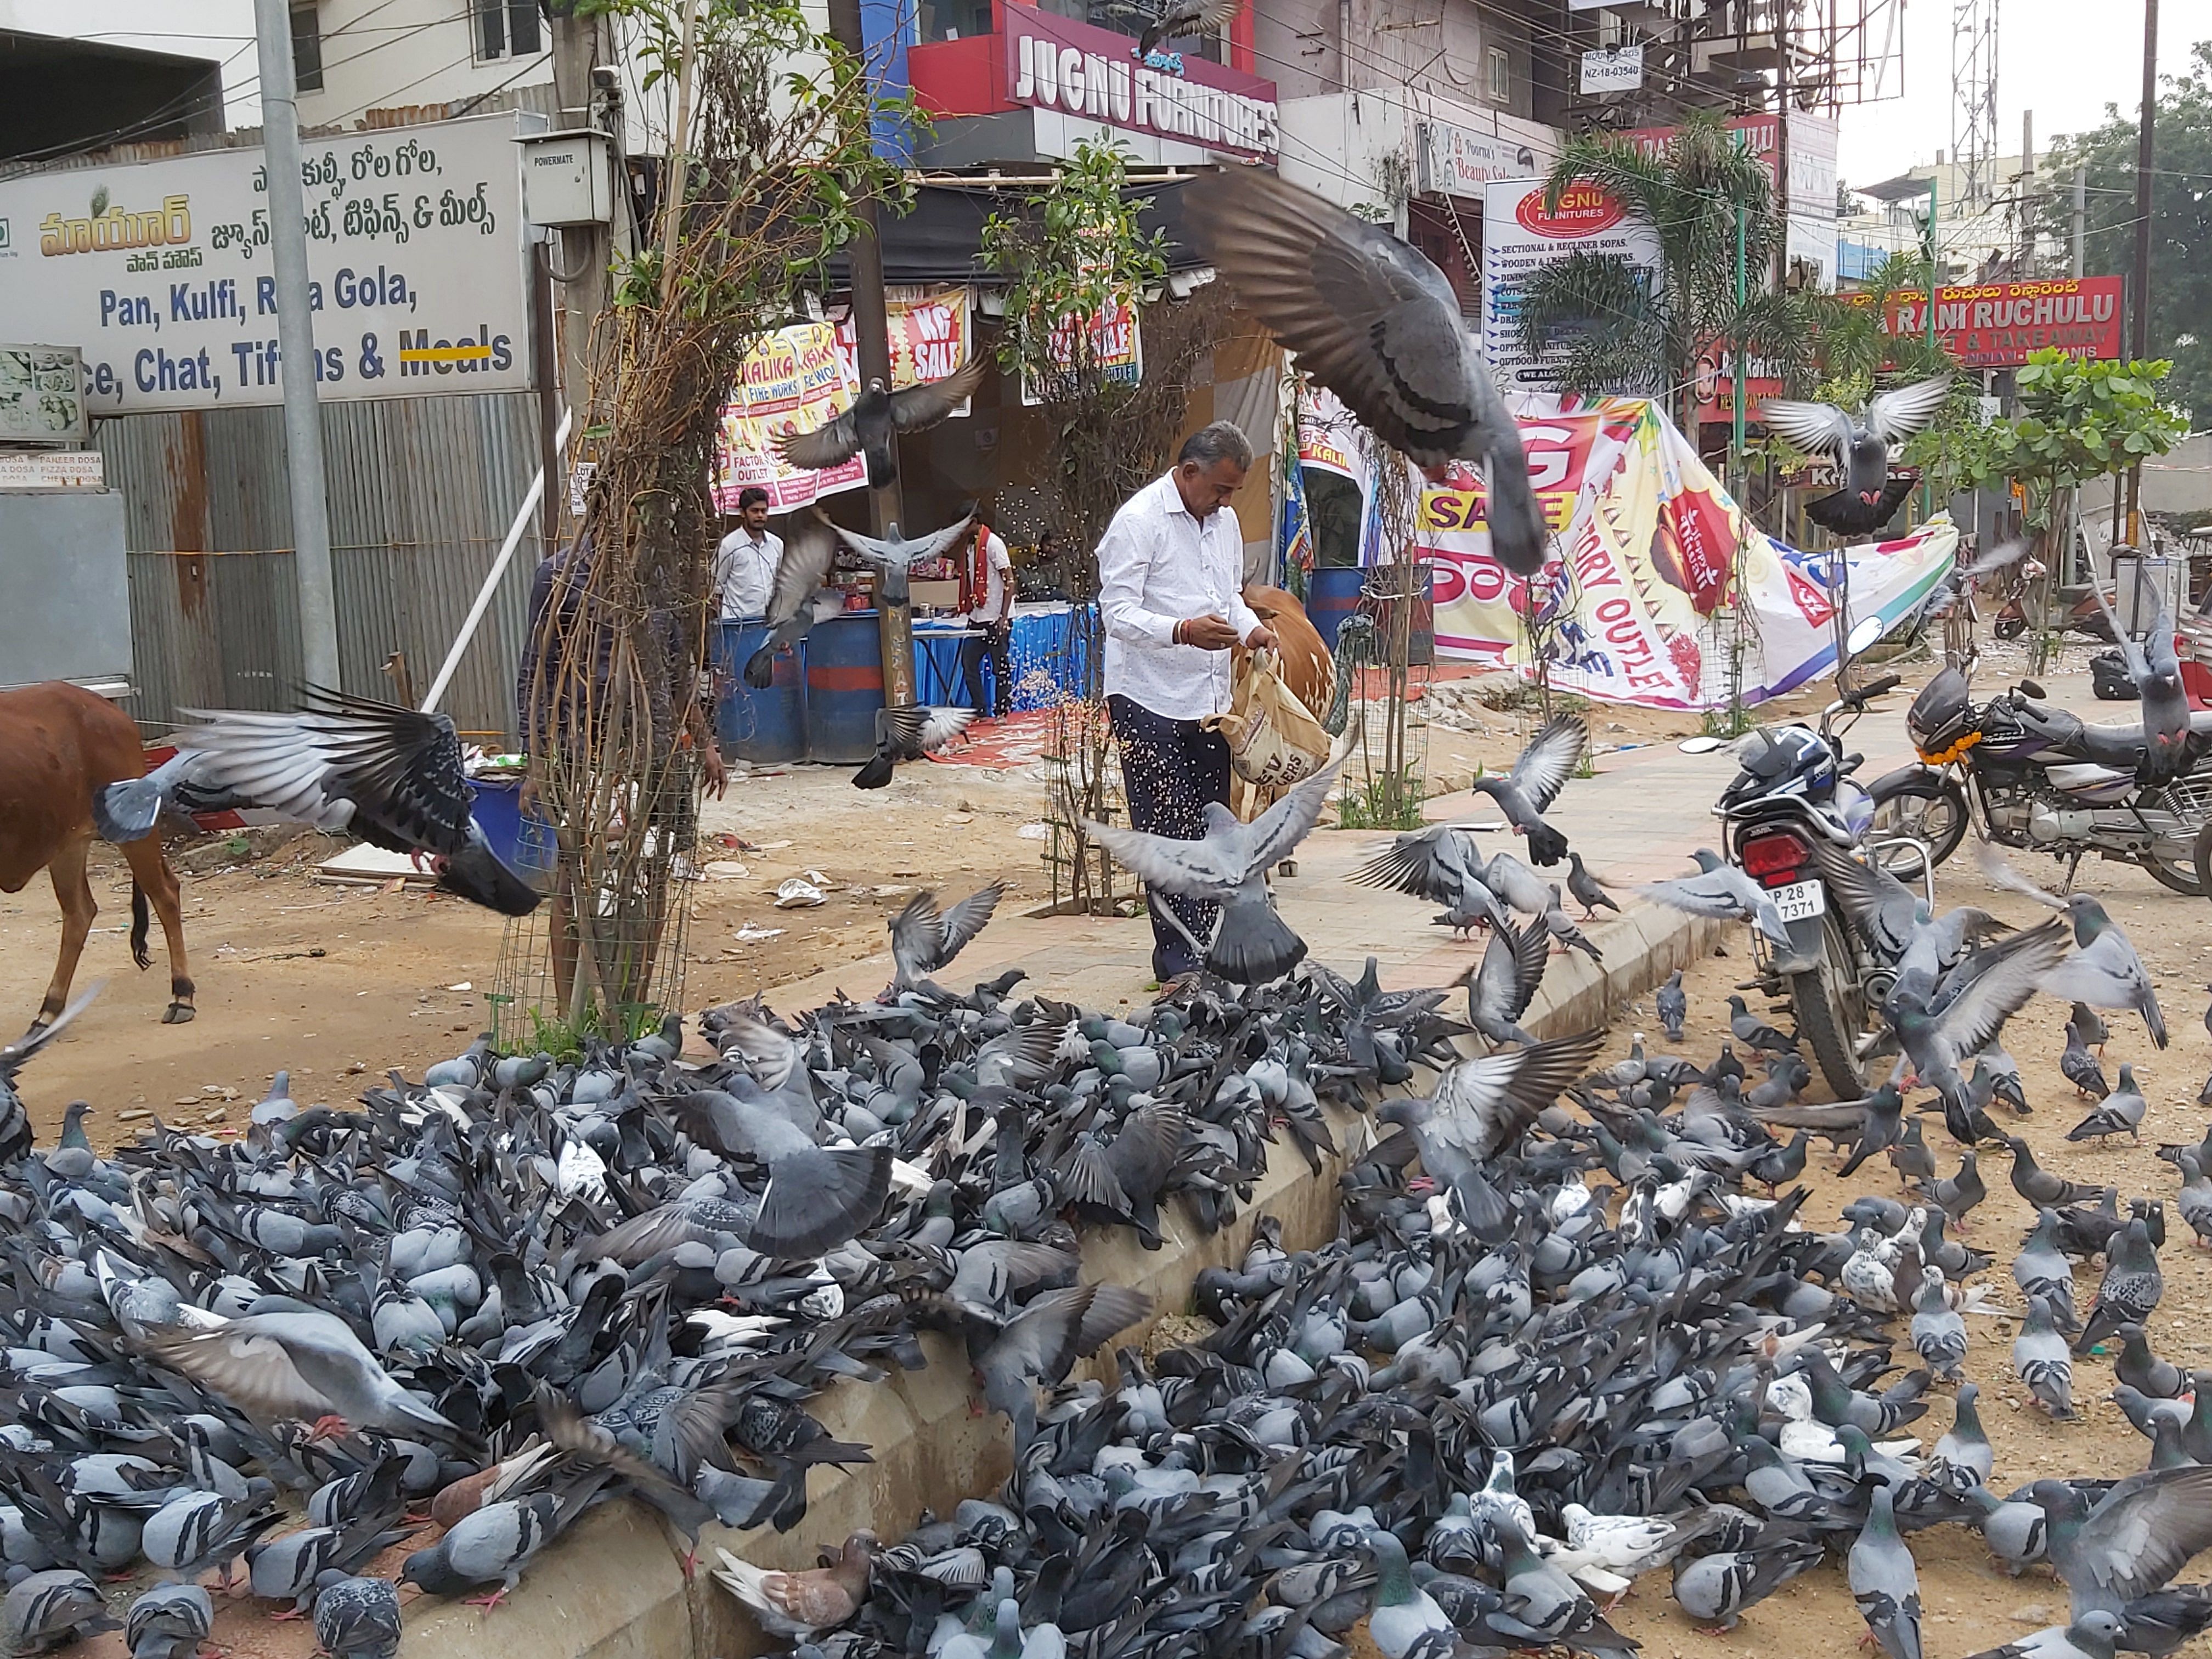 Recently, the Greater Hyderabad Municipal Corporation (GHMC) captured over 500 pigeons from the Moazzam Jahi market area and released them in the forests near Srisailam. DH Photo